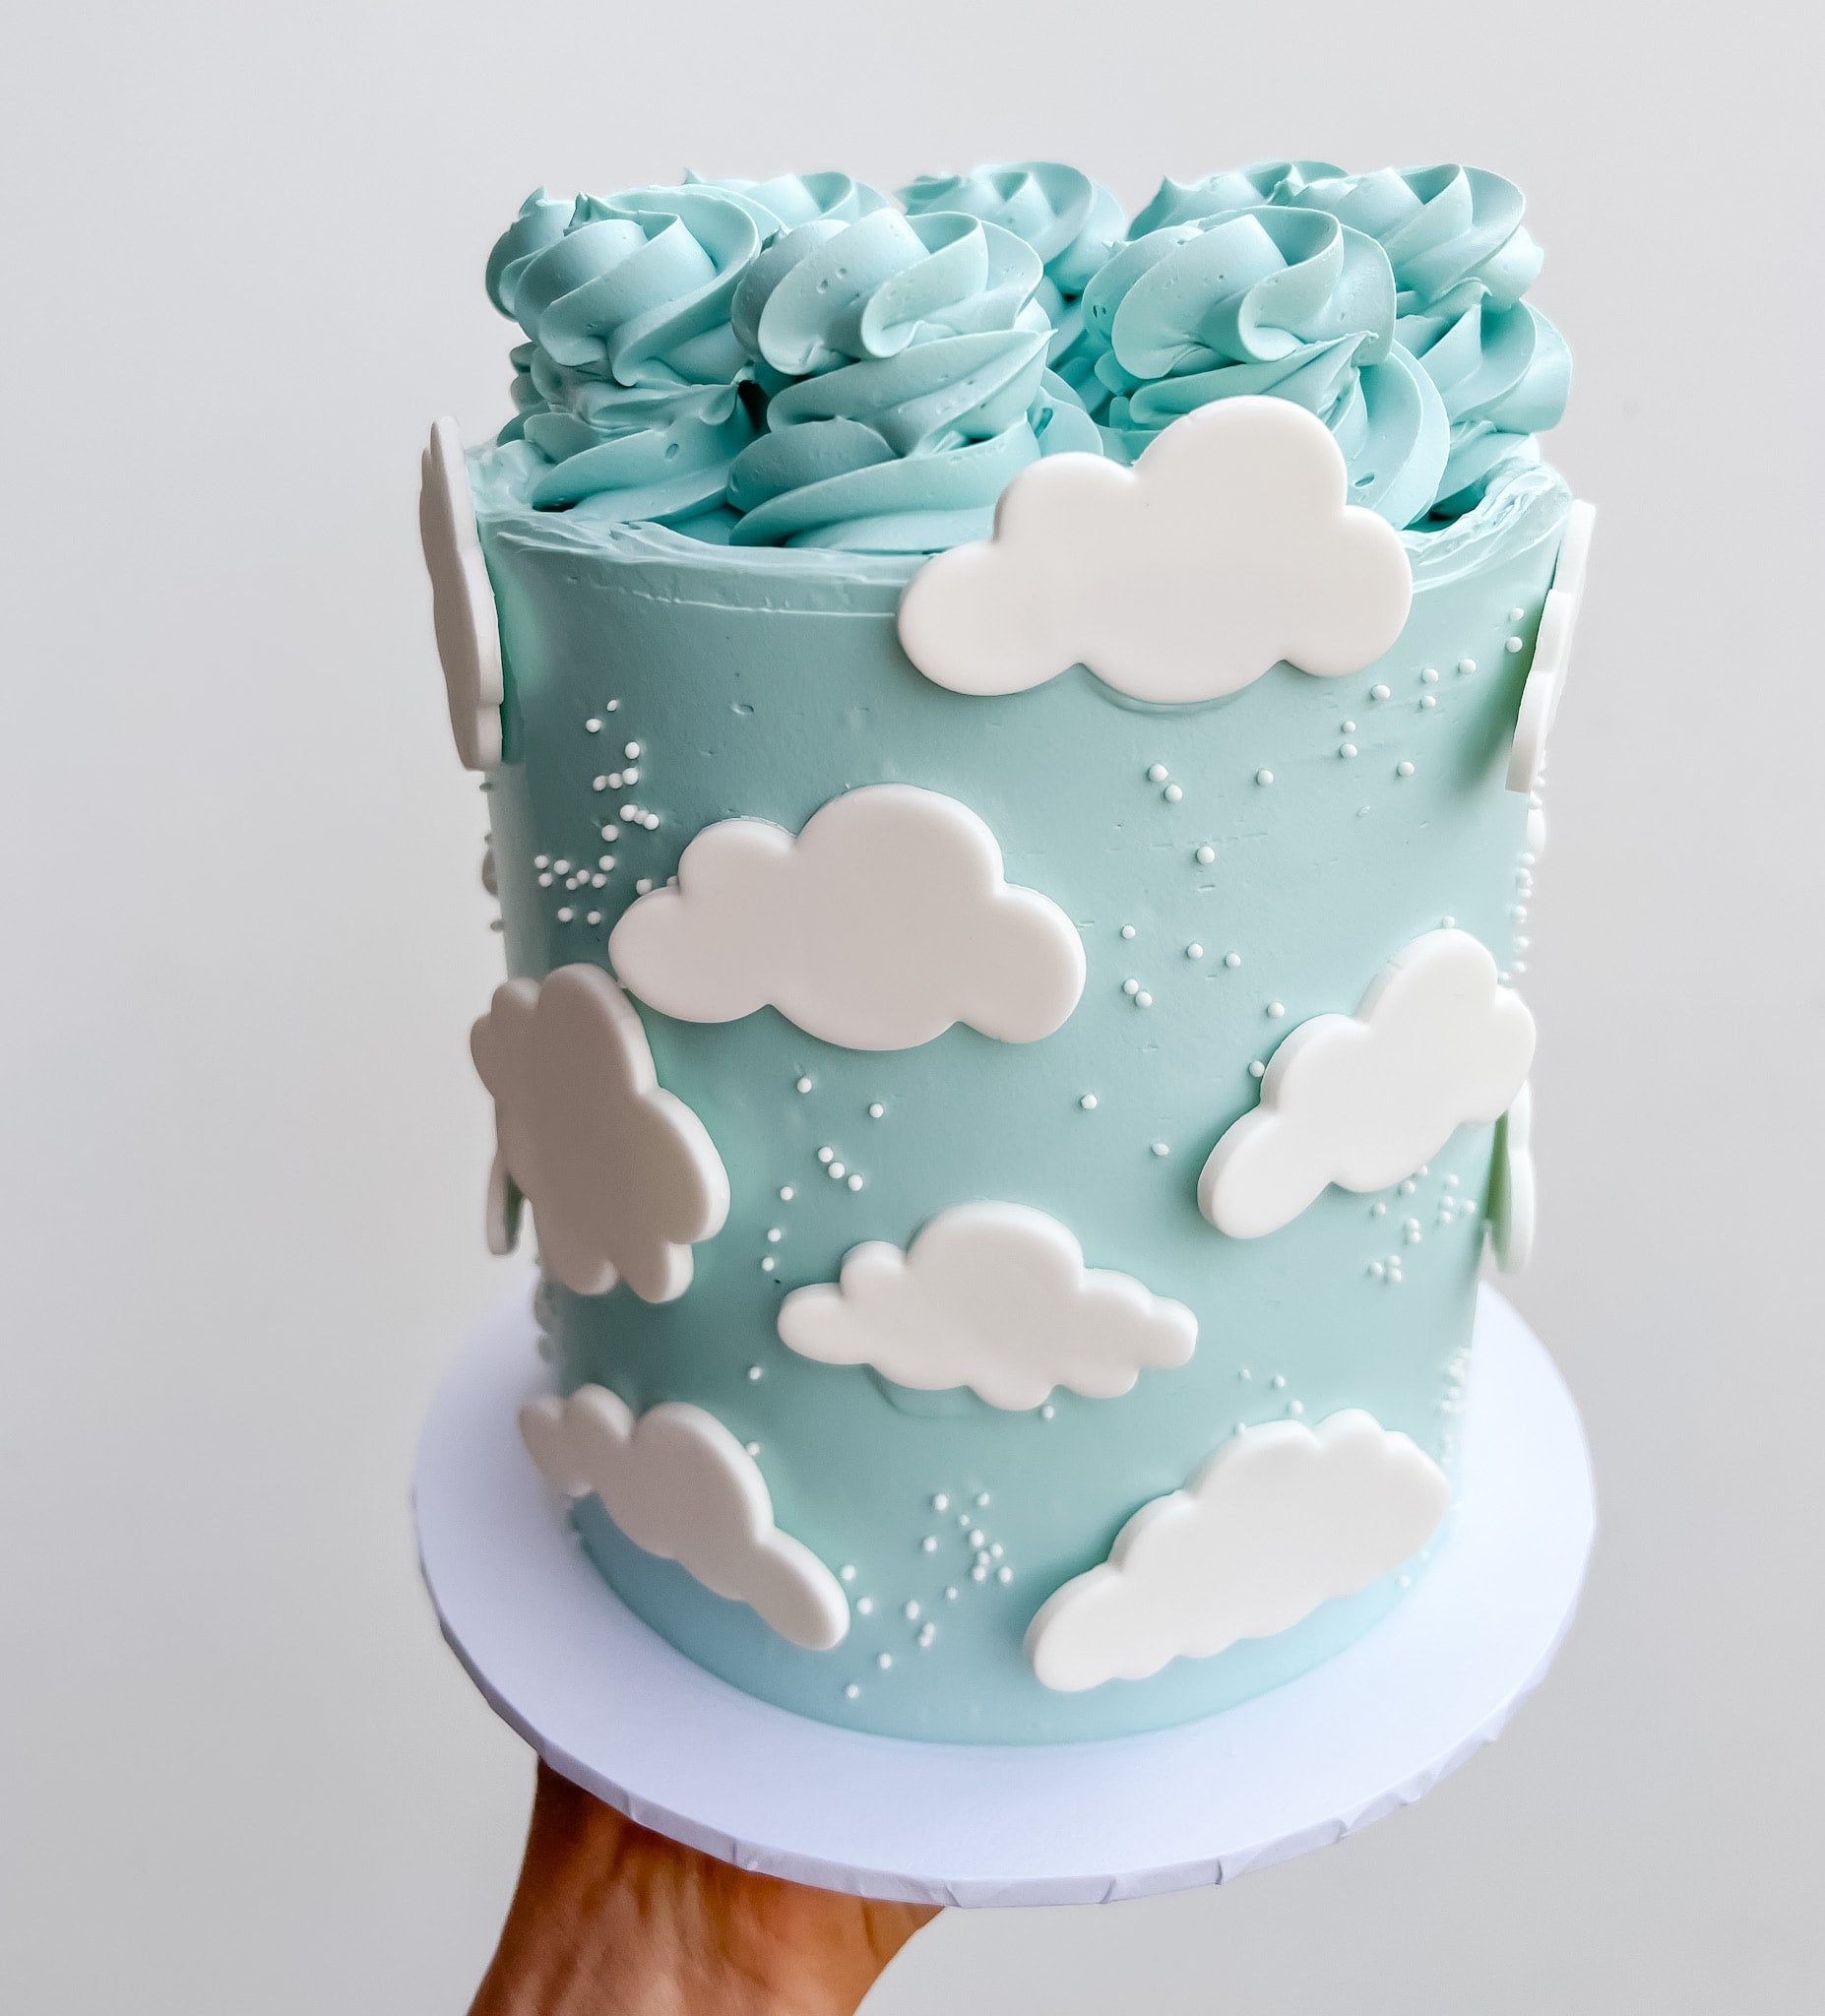 blue cake with clouds on it costumer｜TikTok Search